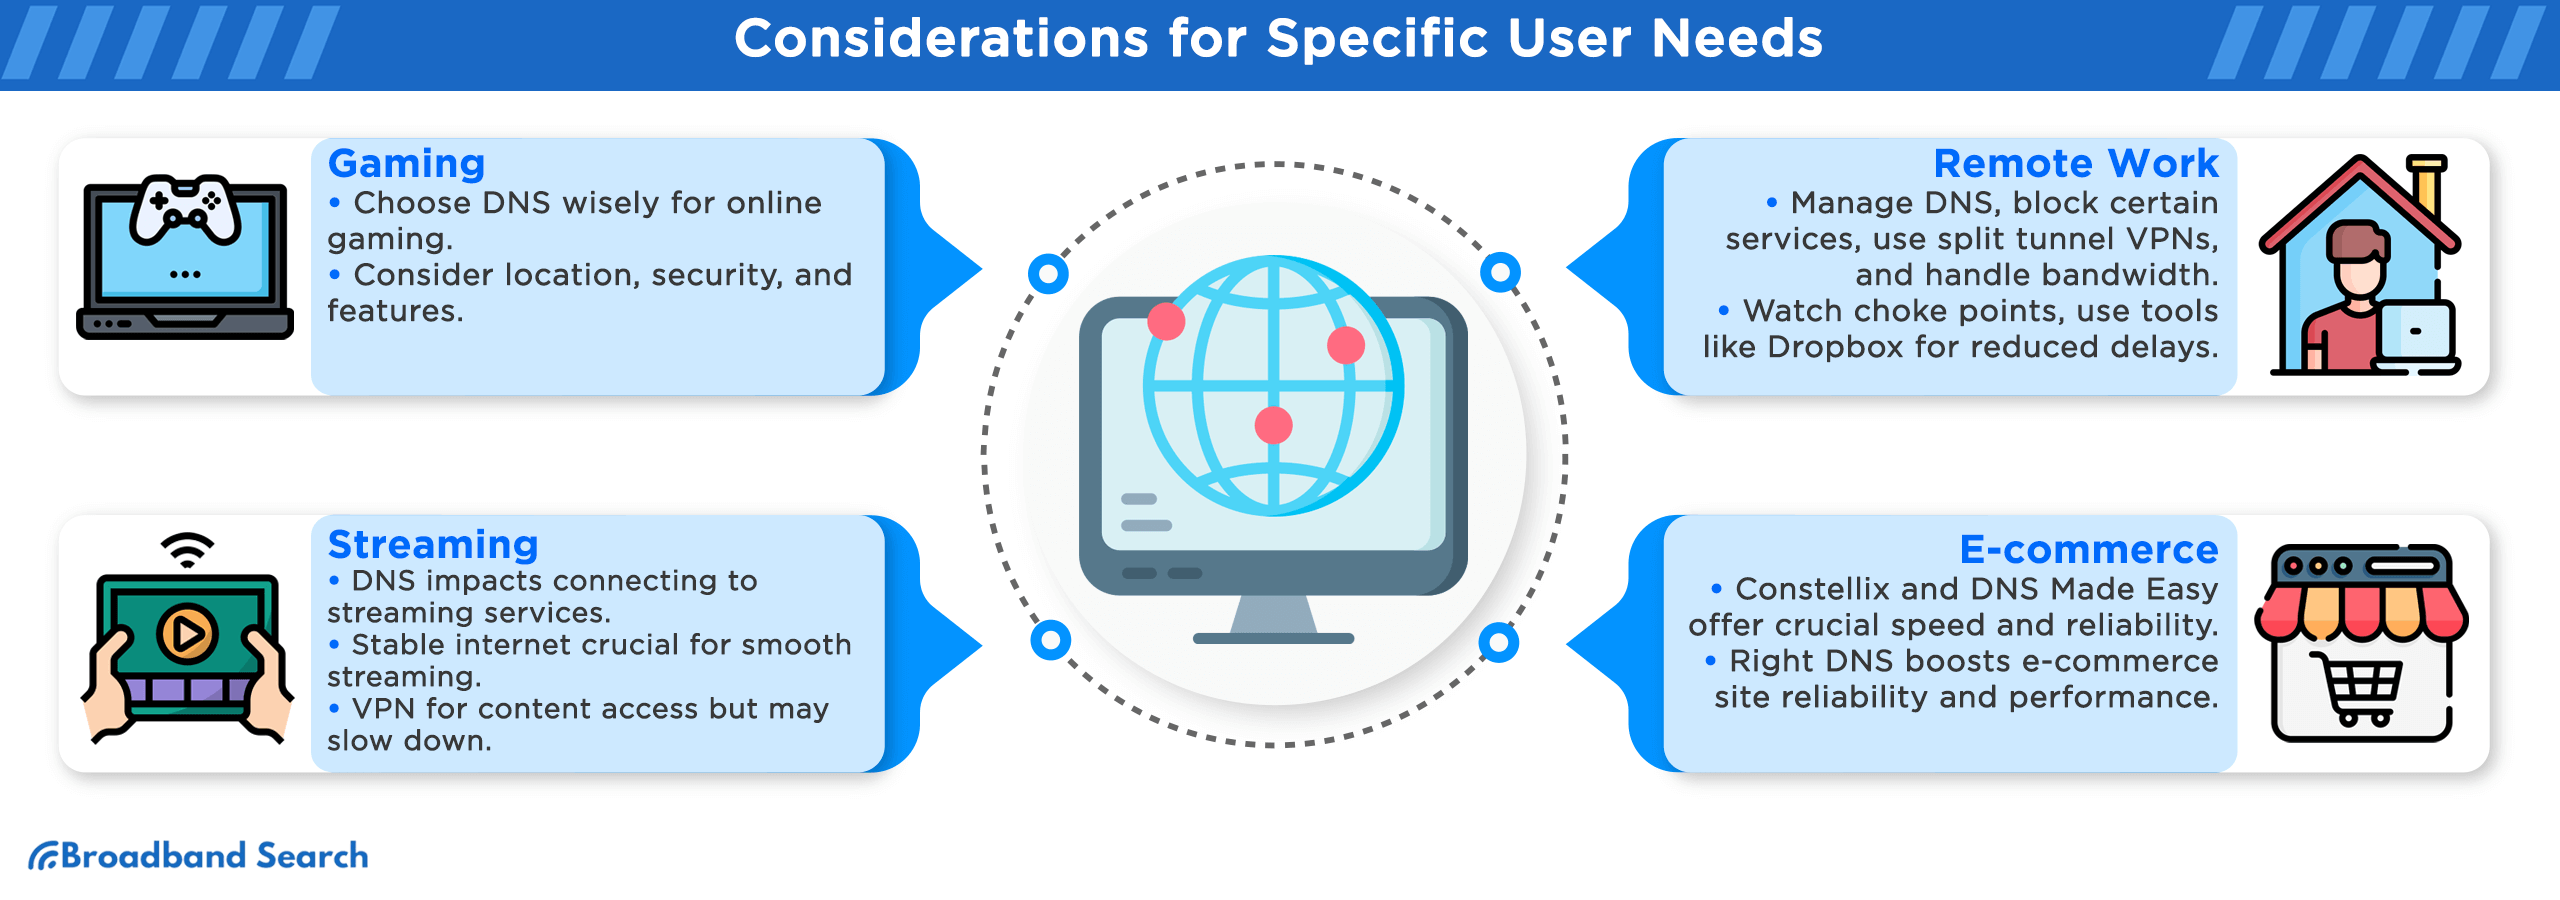 Considerations for Specific user needs